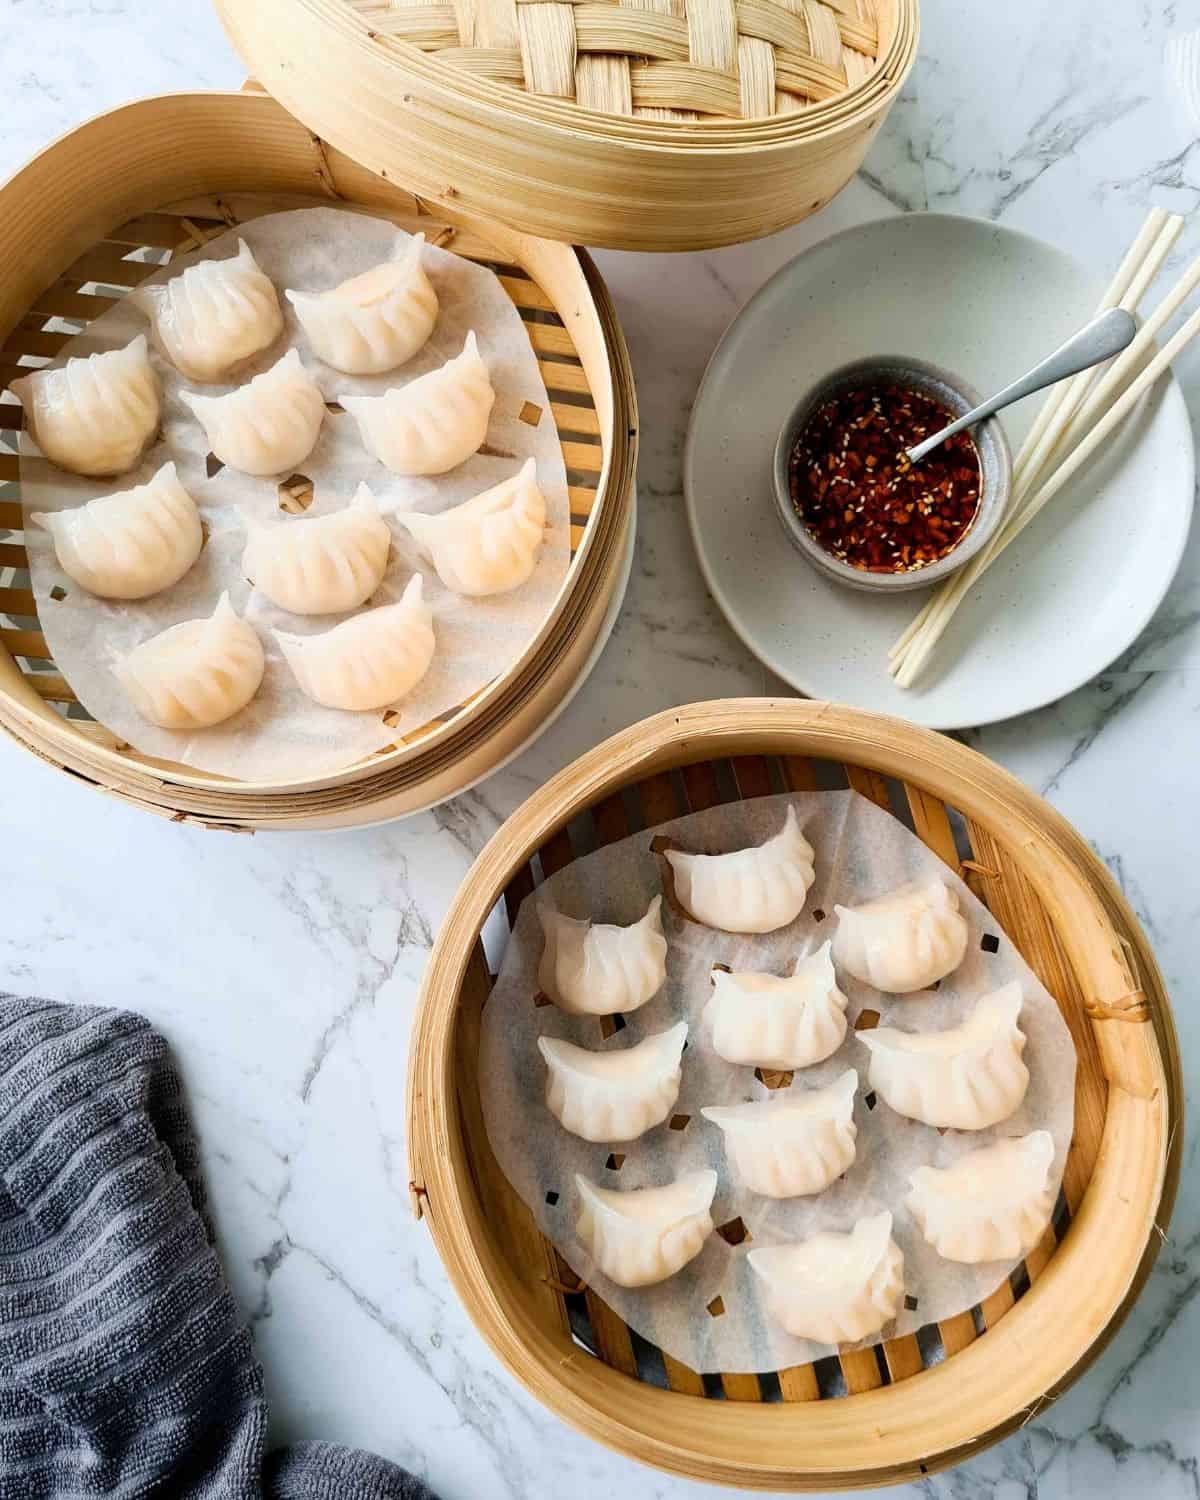 Two baskets filled with cooked dumplings with a side of dipping sauce